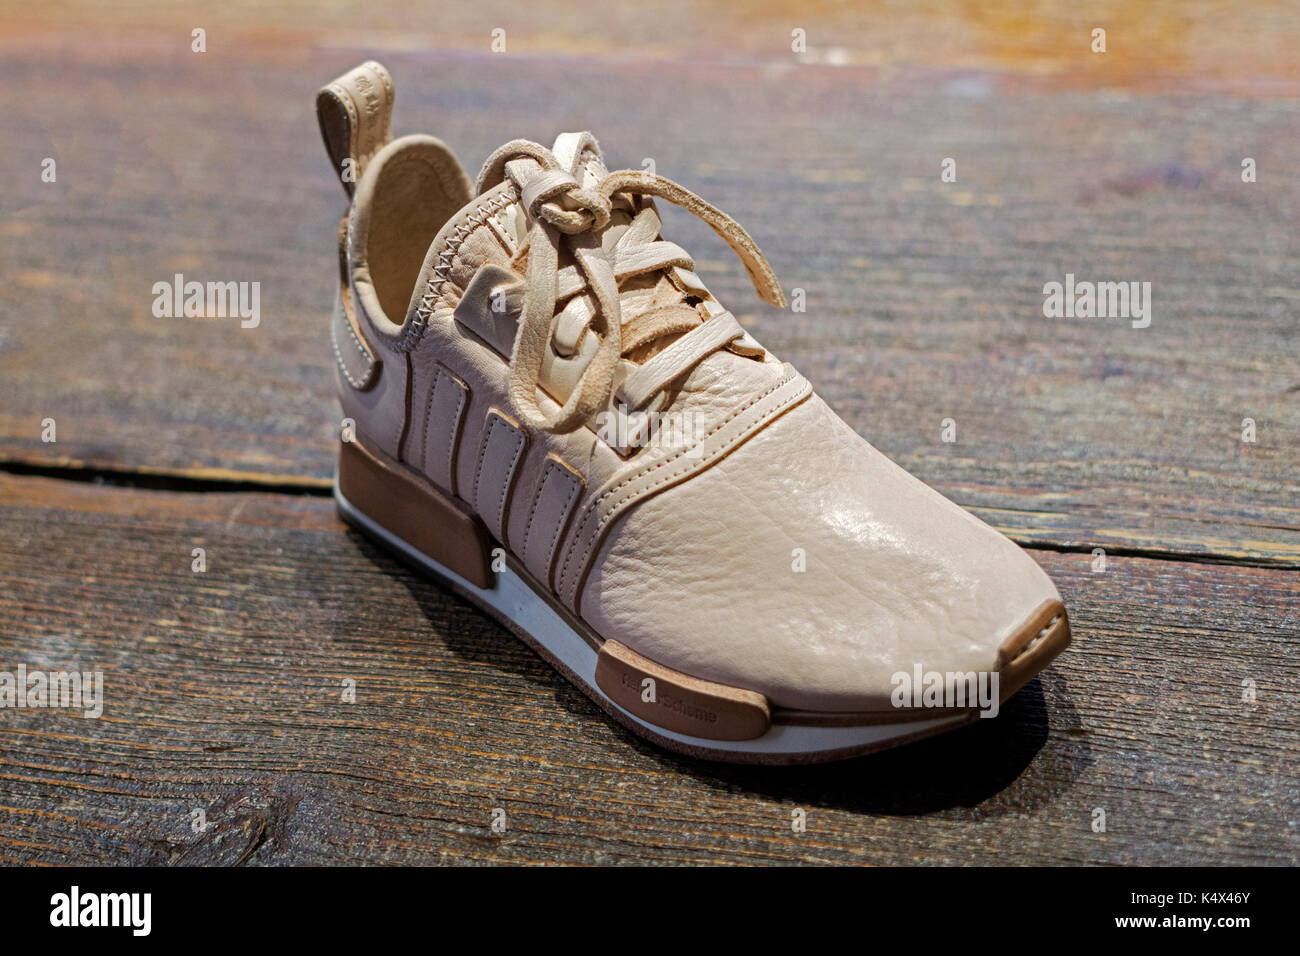 Adidas Hender Scheme leather shoe for sale for $1,000 per pair at the Nike KITH store on Broadway in Greenwich Village, New York City. Stock Photo